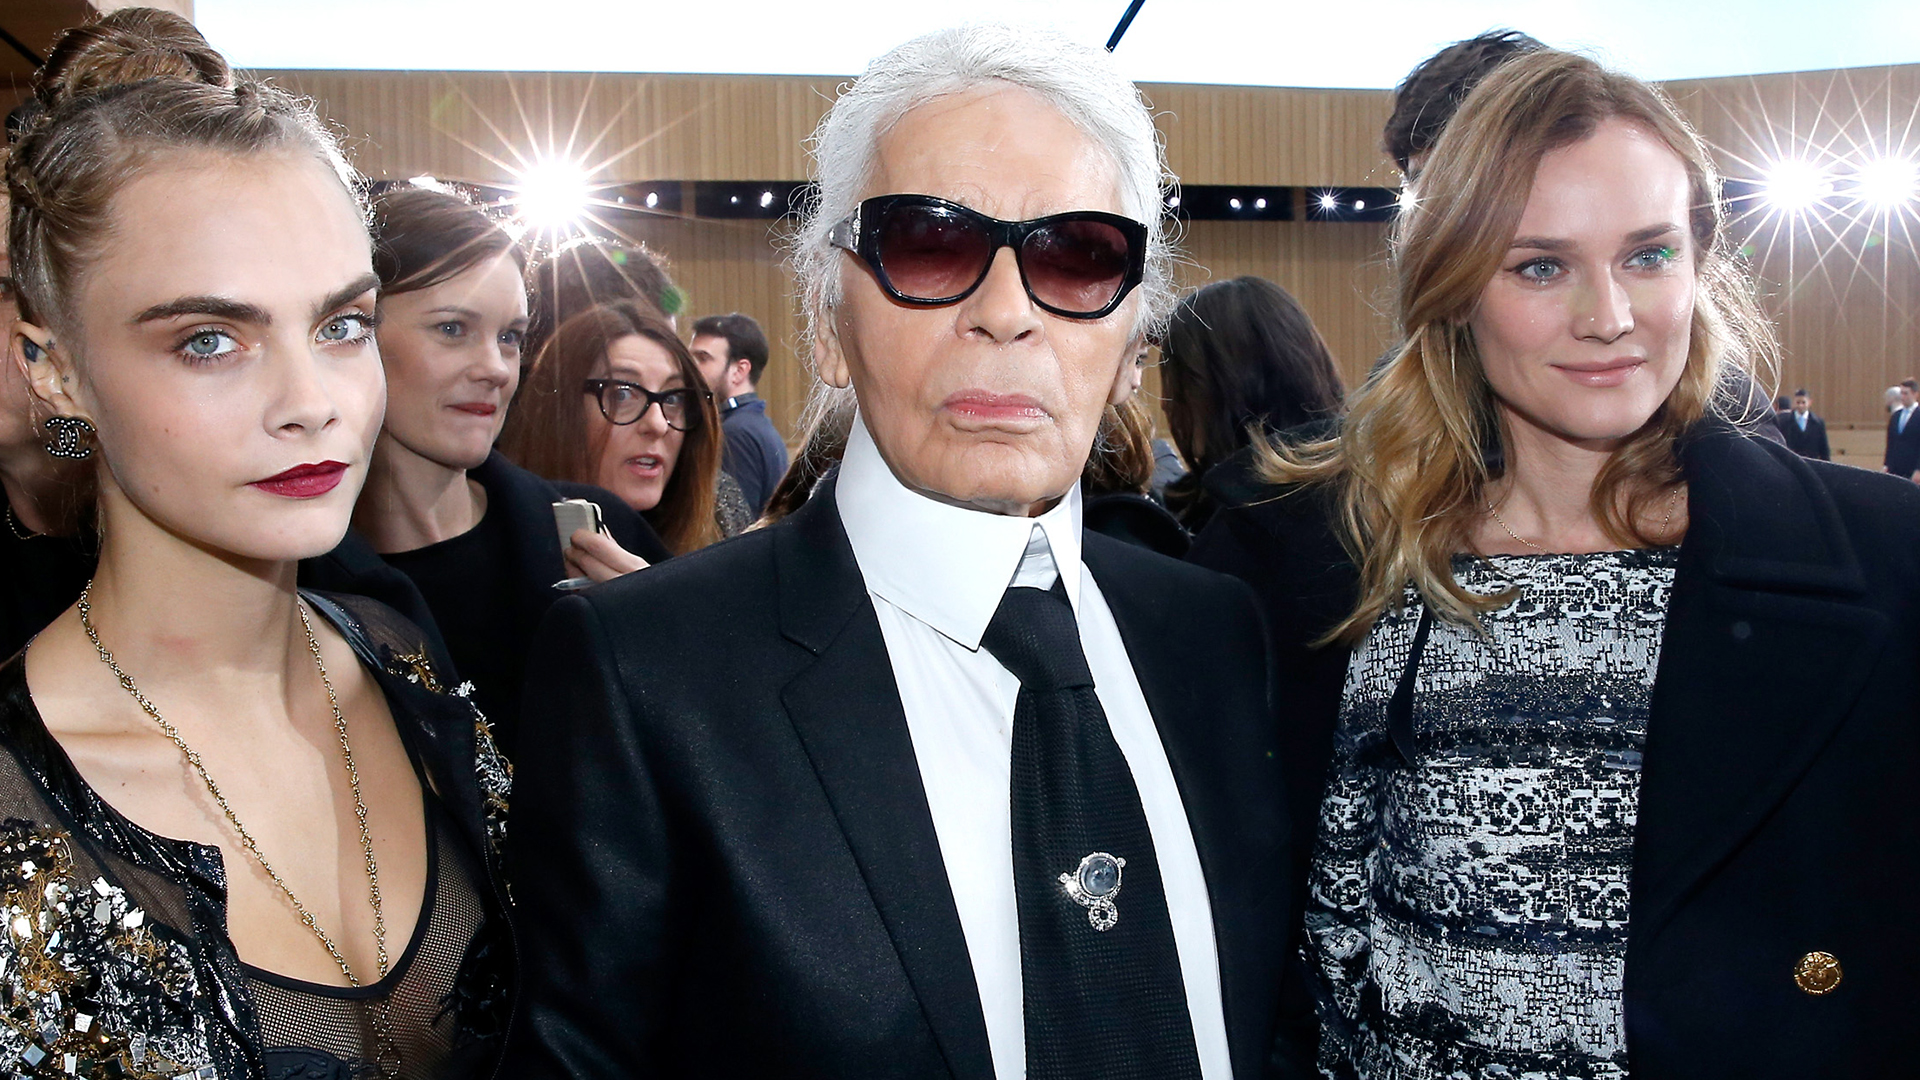 Karl Lagerfeld and the Controversies That Color His Fashion Legacy